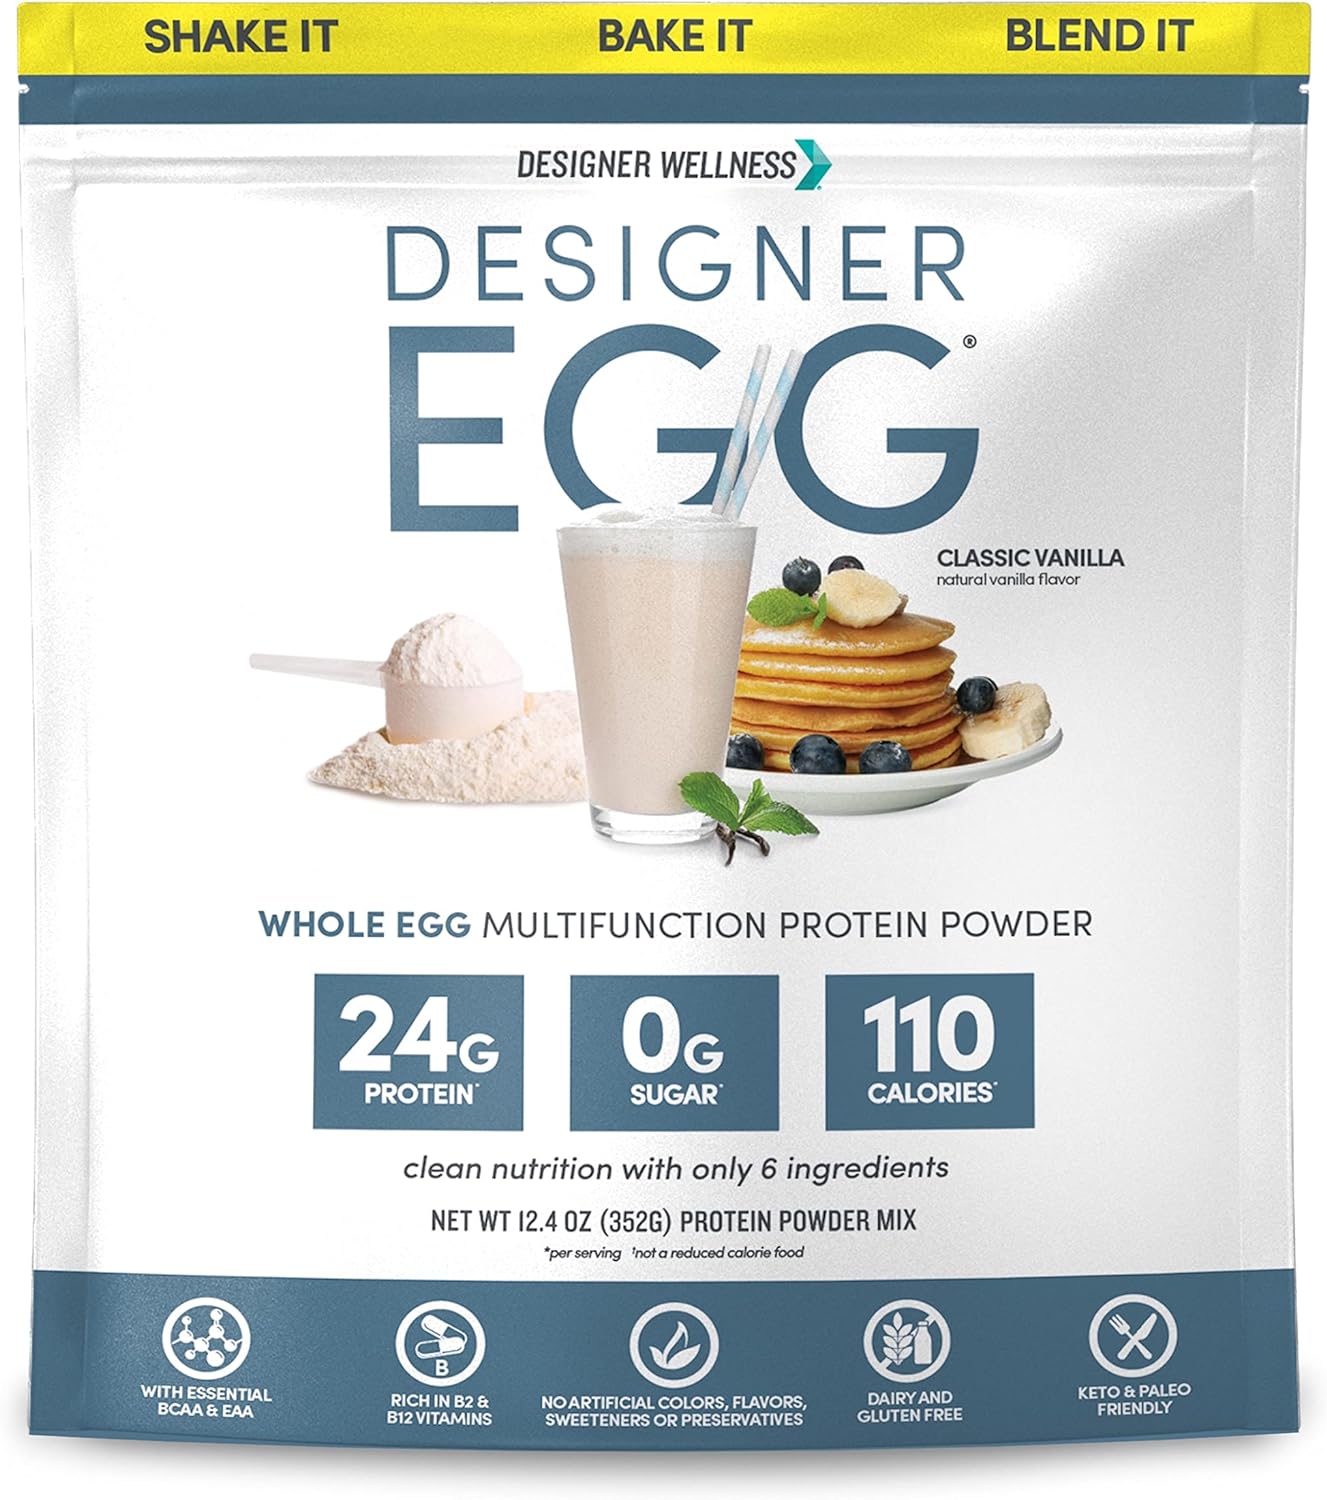 Designer Wellness, Designer Egg, Natural Egg Yolk & Egg White Protein Powder, Keto and Paleo Friendly, Low Calorie, Less Fat and Cholesterol, Classic Vanilla, 12.4 Ounce